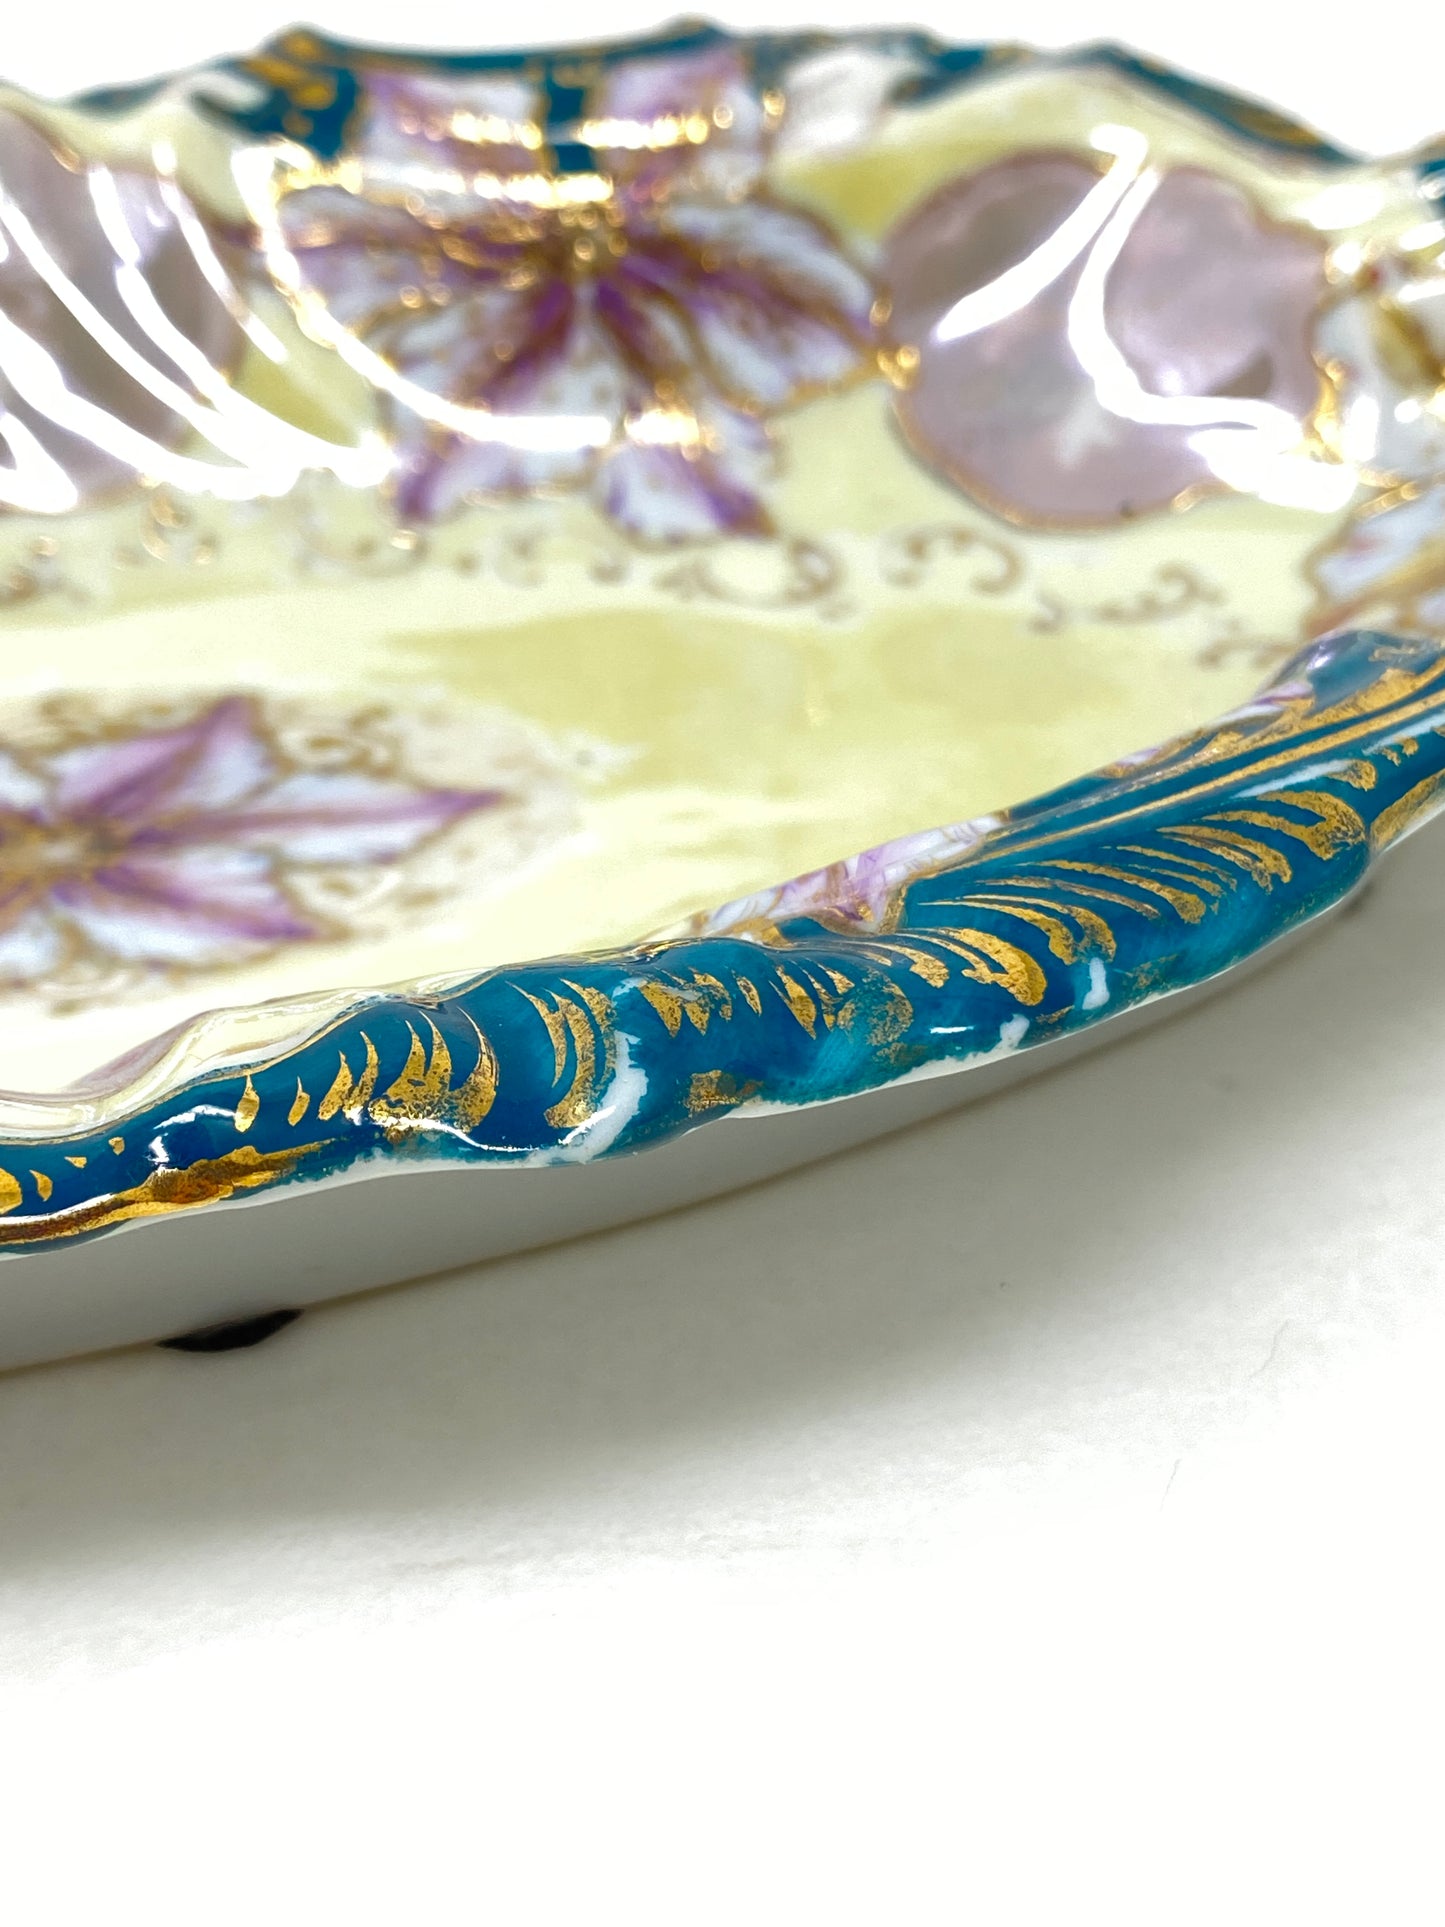 R.S. Prussia Porcelain Hand Painted Teal & Yellow Celery Dish